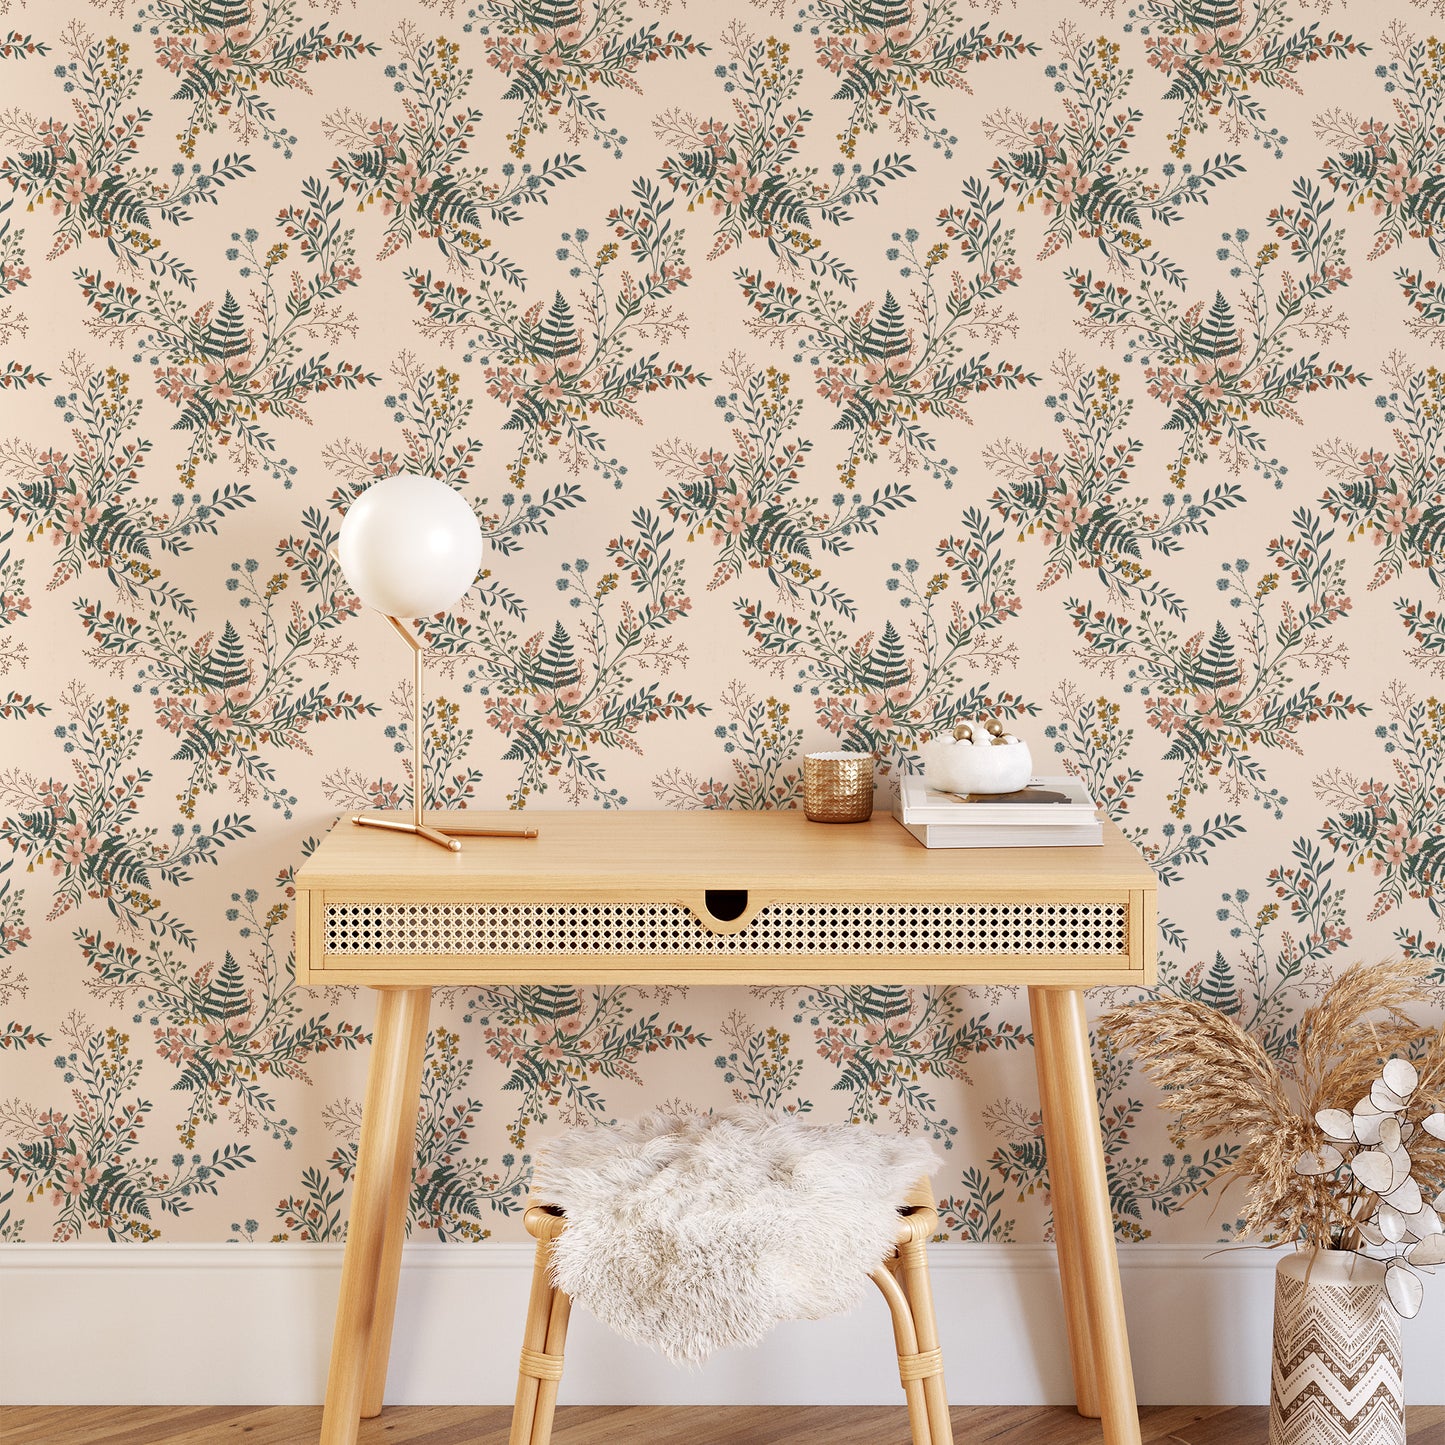 Bedroom featuring Cayla Naylor Juniper- Dogwood Peel and Stick Wallpaper - a foliage pattern